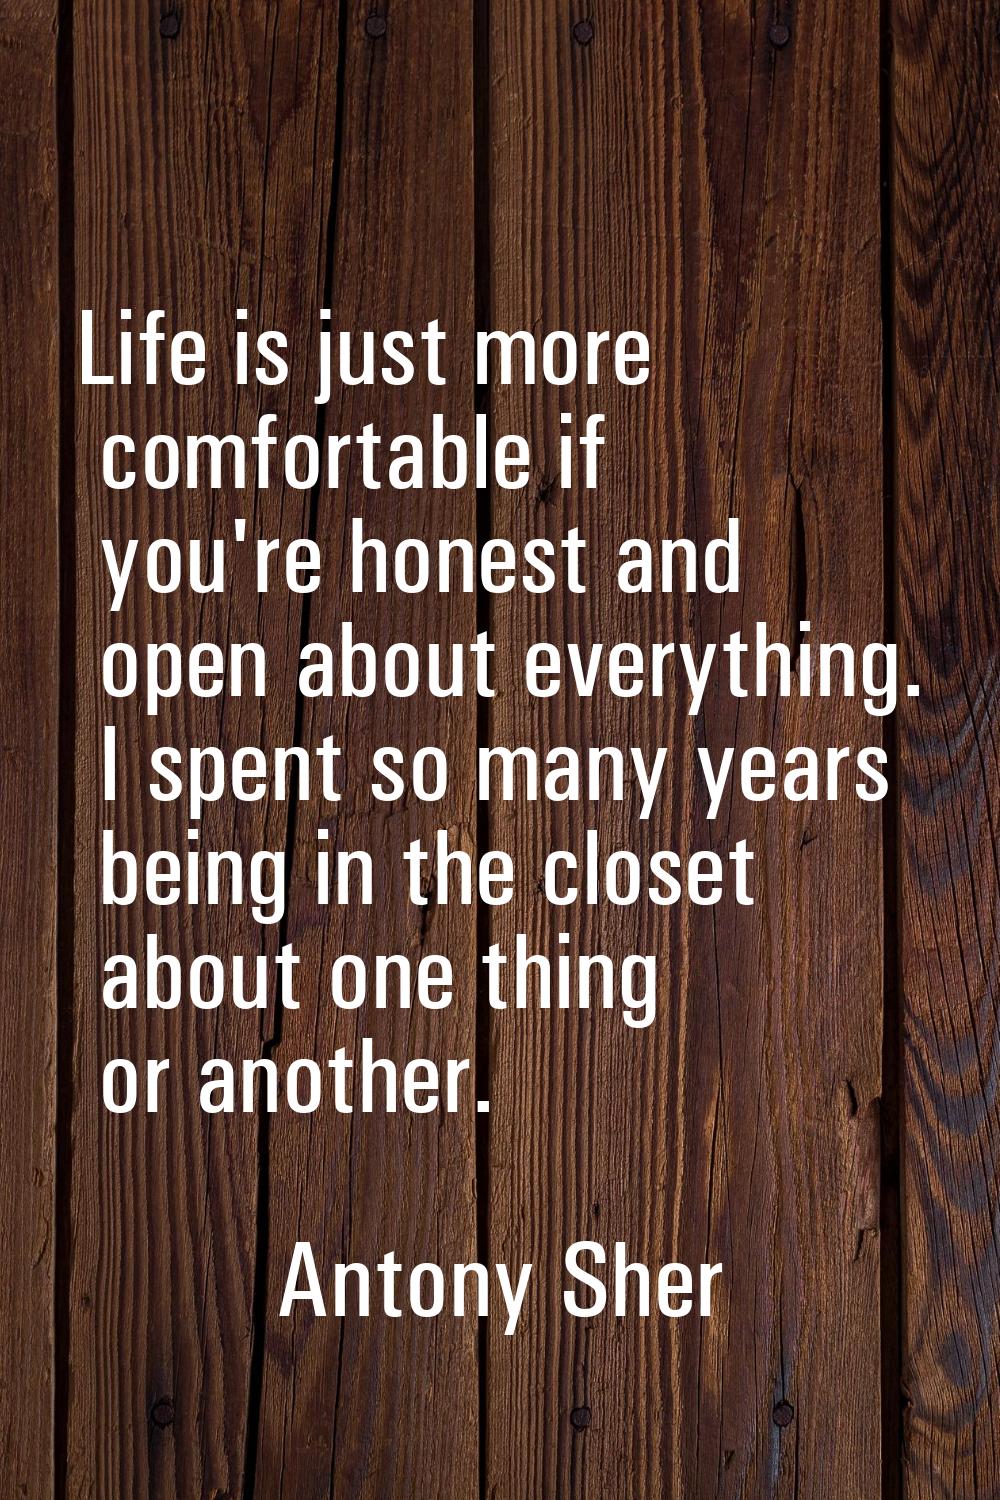 Life is just more comfortable if you're honest and open about everything. I spent so many years bei